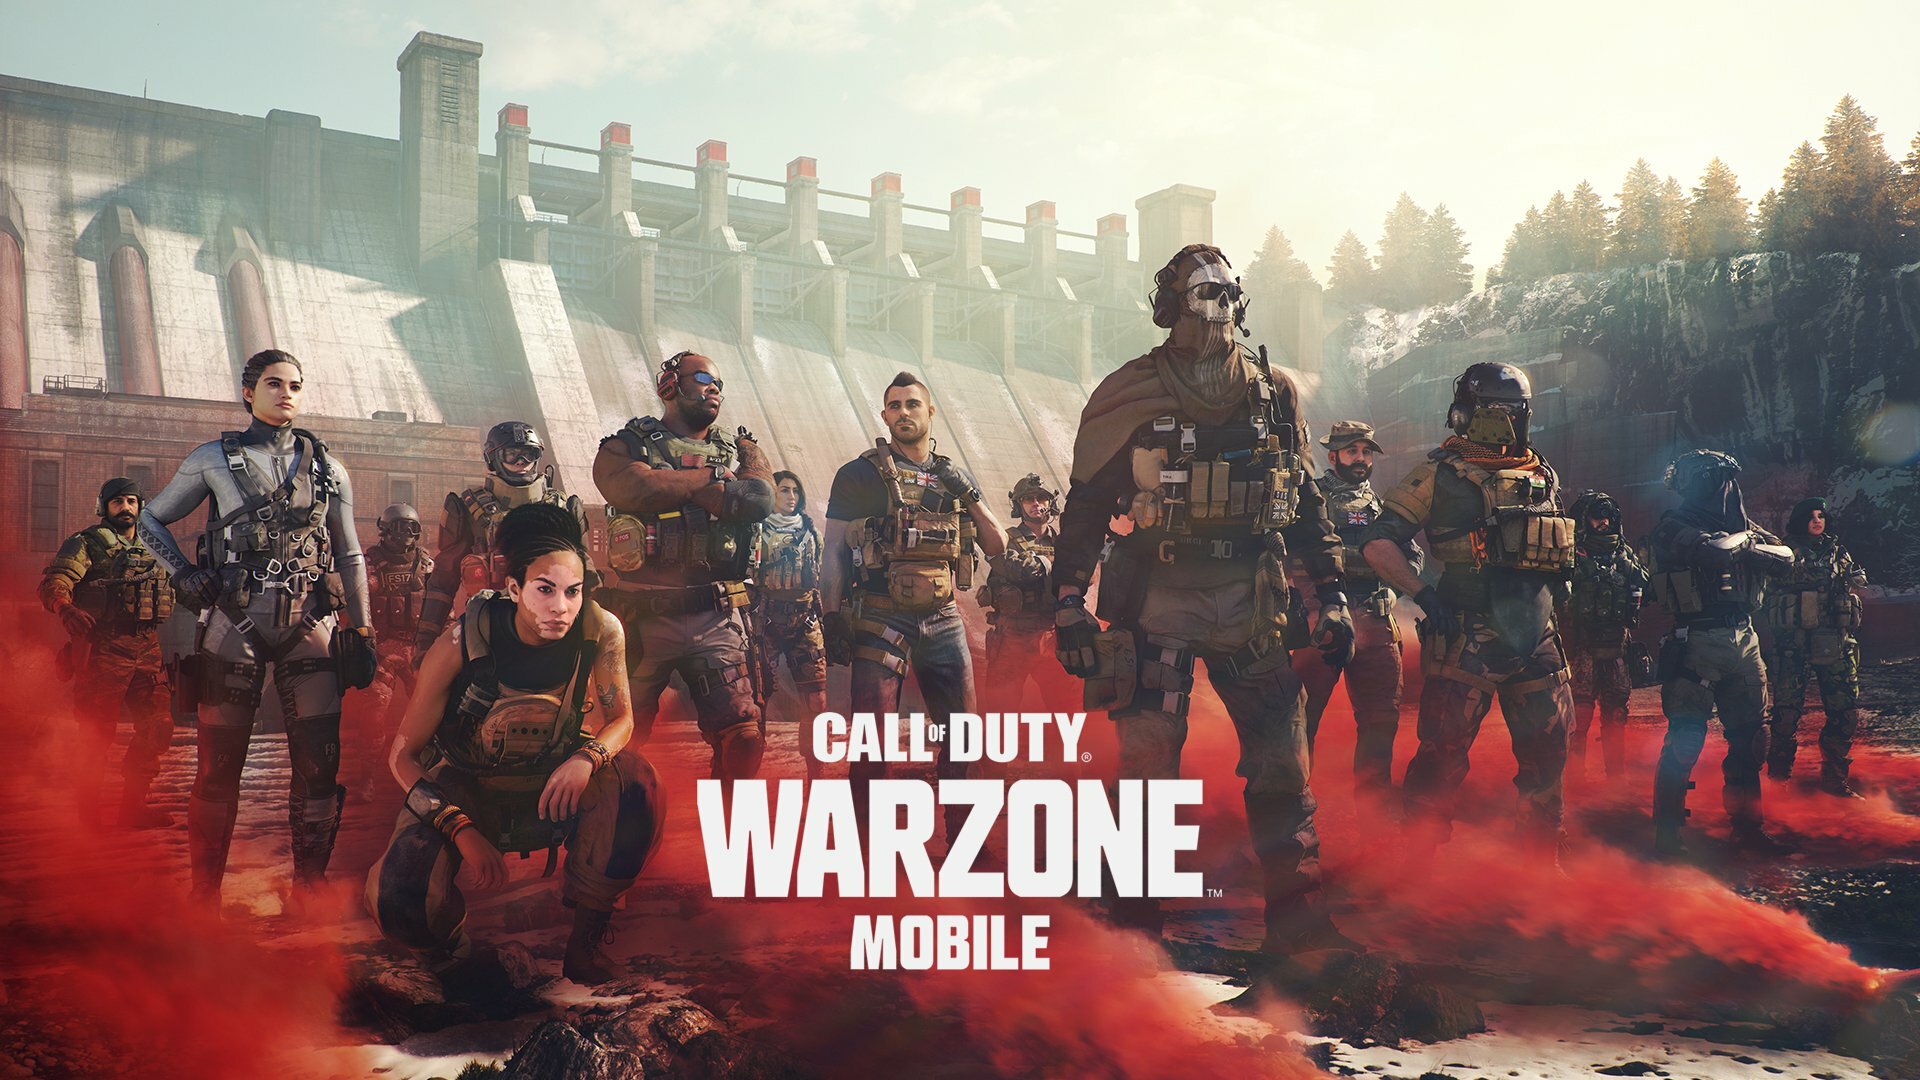 Warzone Mobile size - How big is the game?